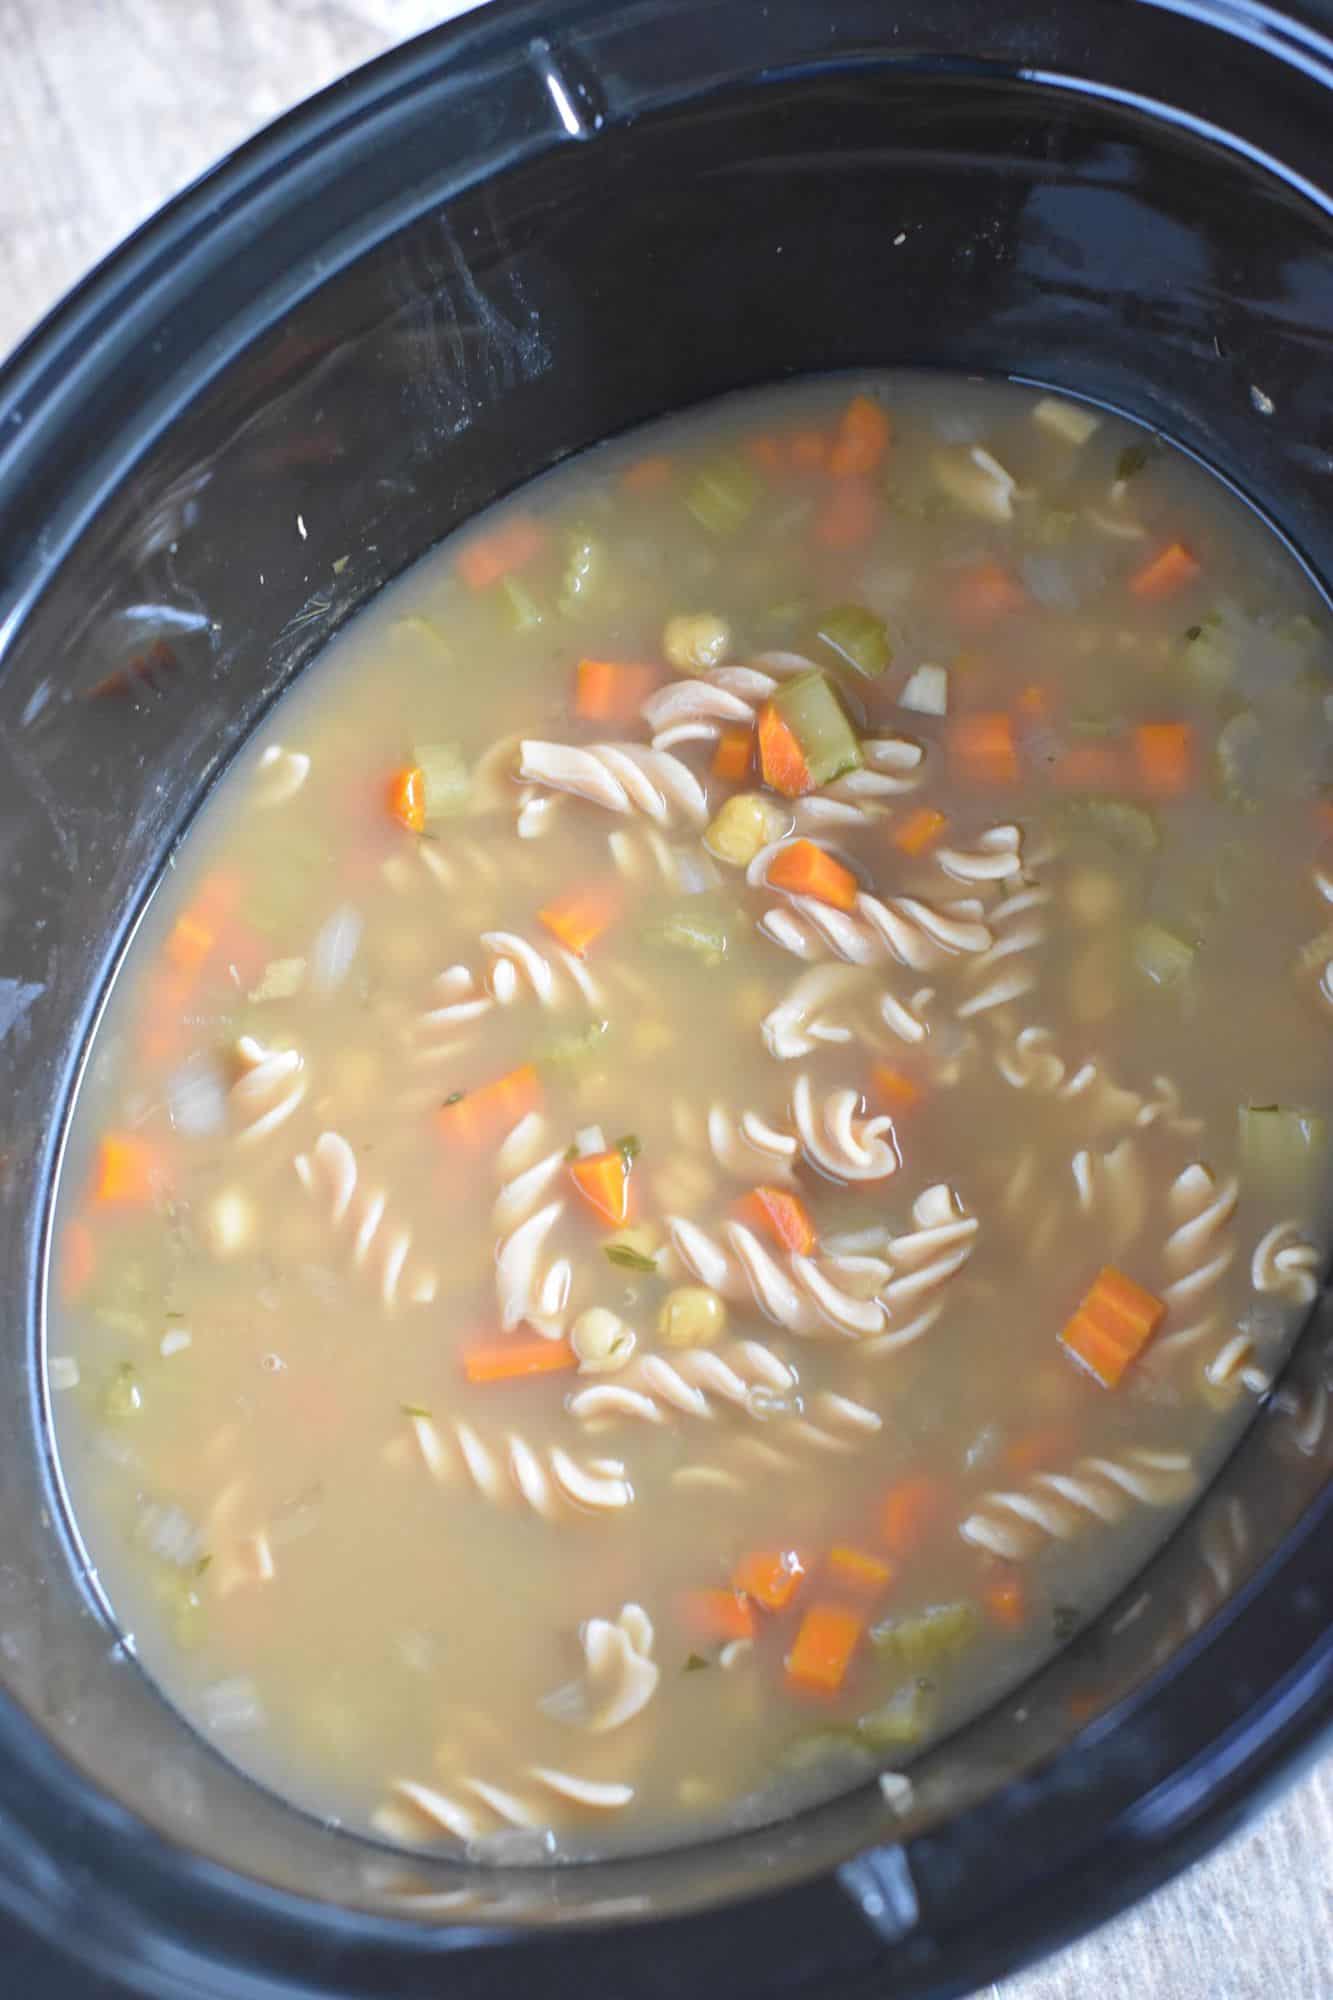 soup after cooking in slow cooker with gluten-free pasta added